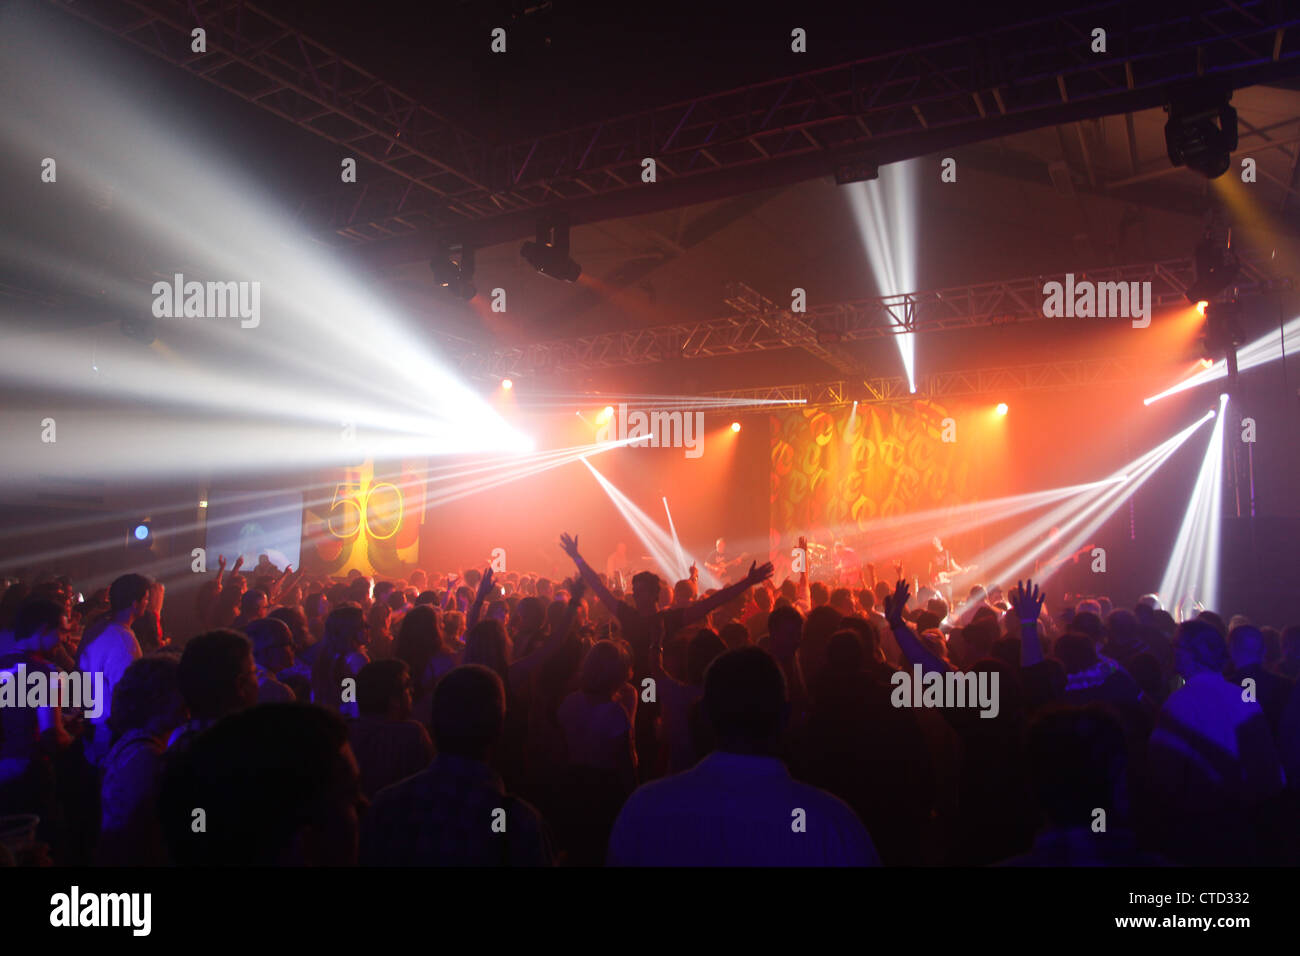 concert gig stage lights crowd arms in air crowd shot Stock Photo